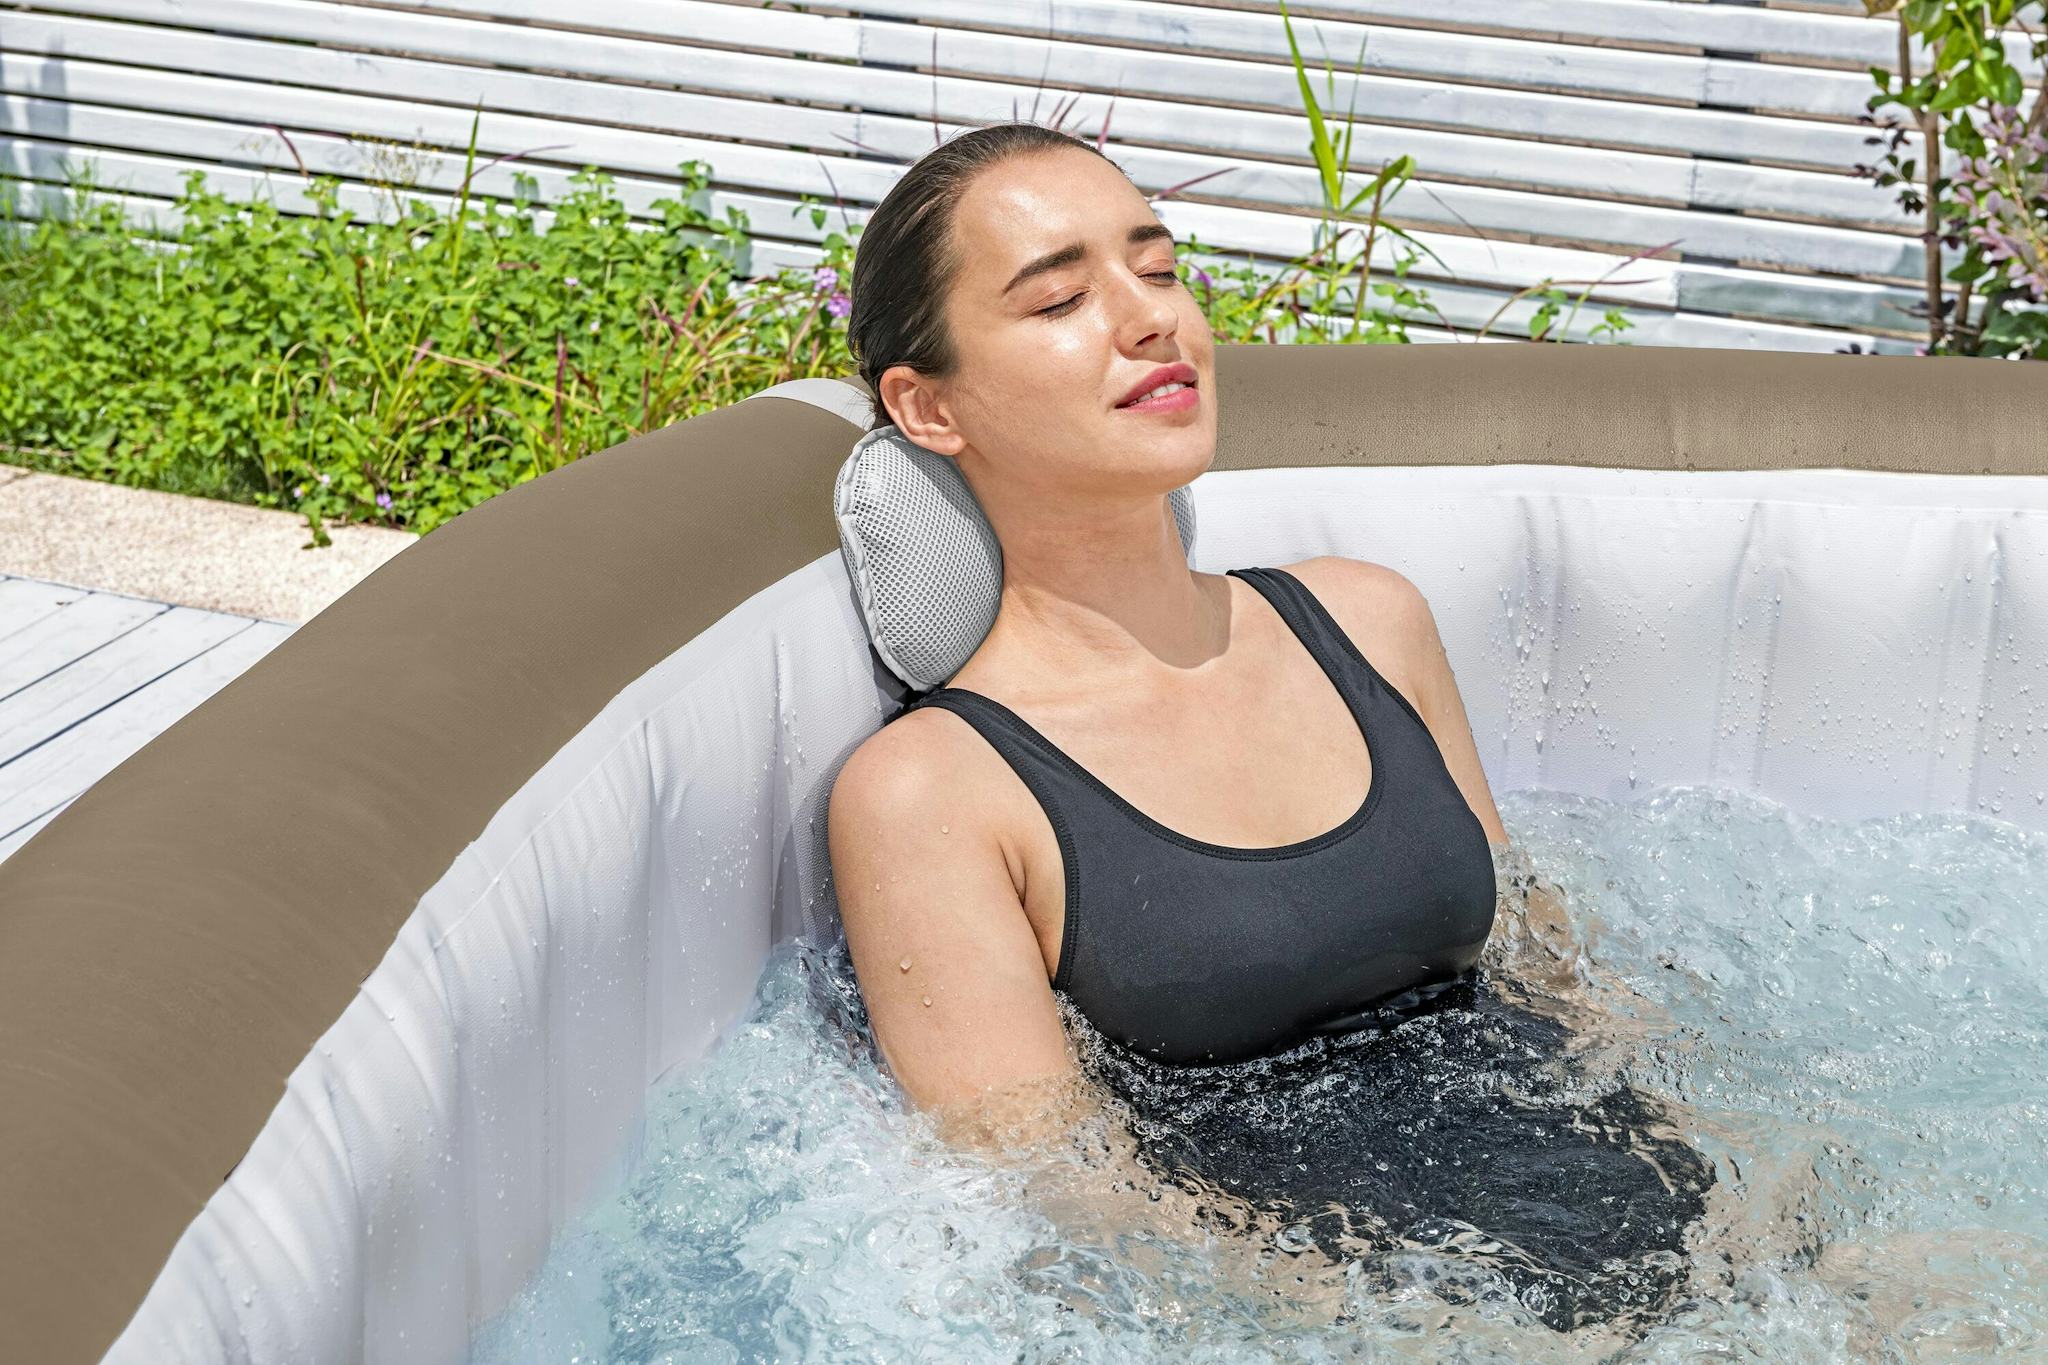 Spas Gonflables Spa gonflable carré Lay-Z-Spa® Palma Hydrojet Pro™ 5 - 7 places Bestway 8